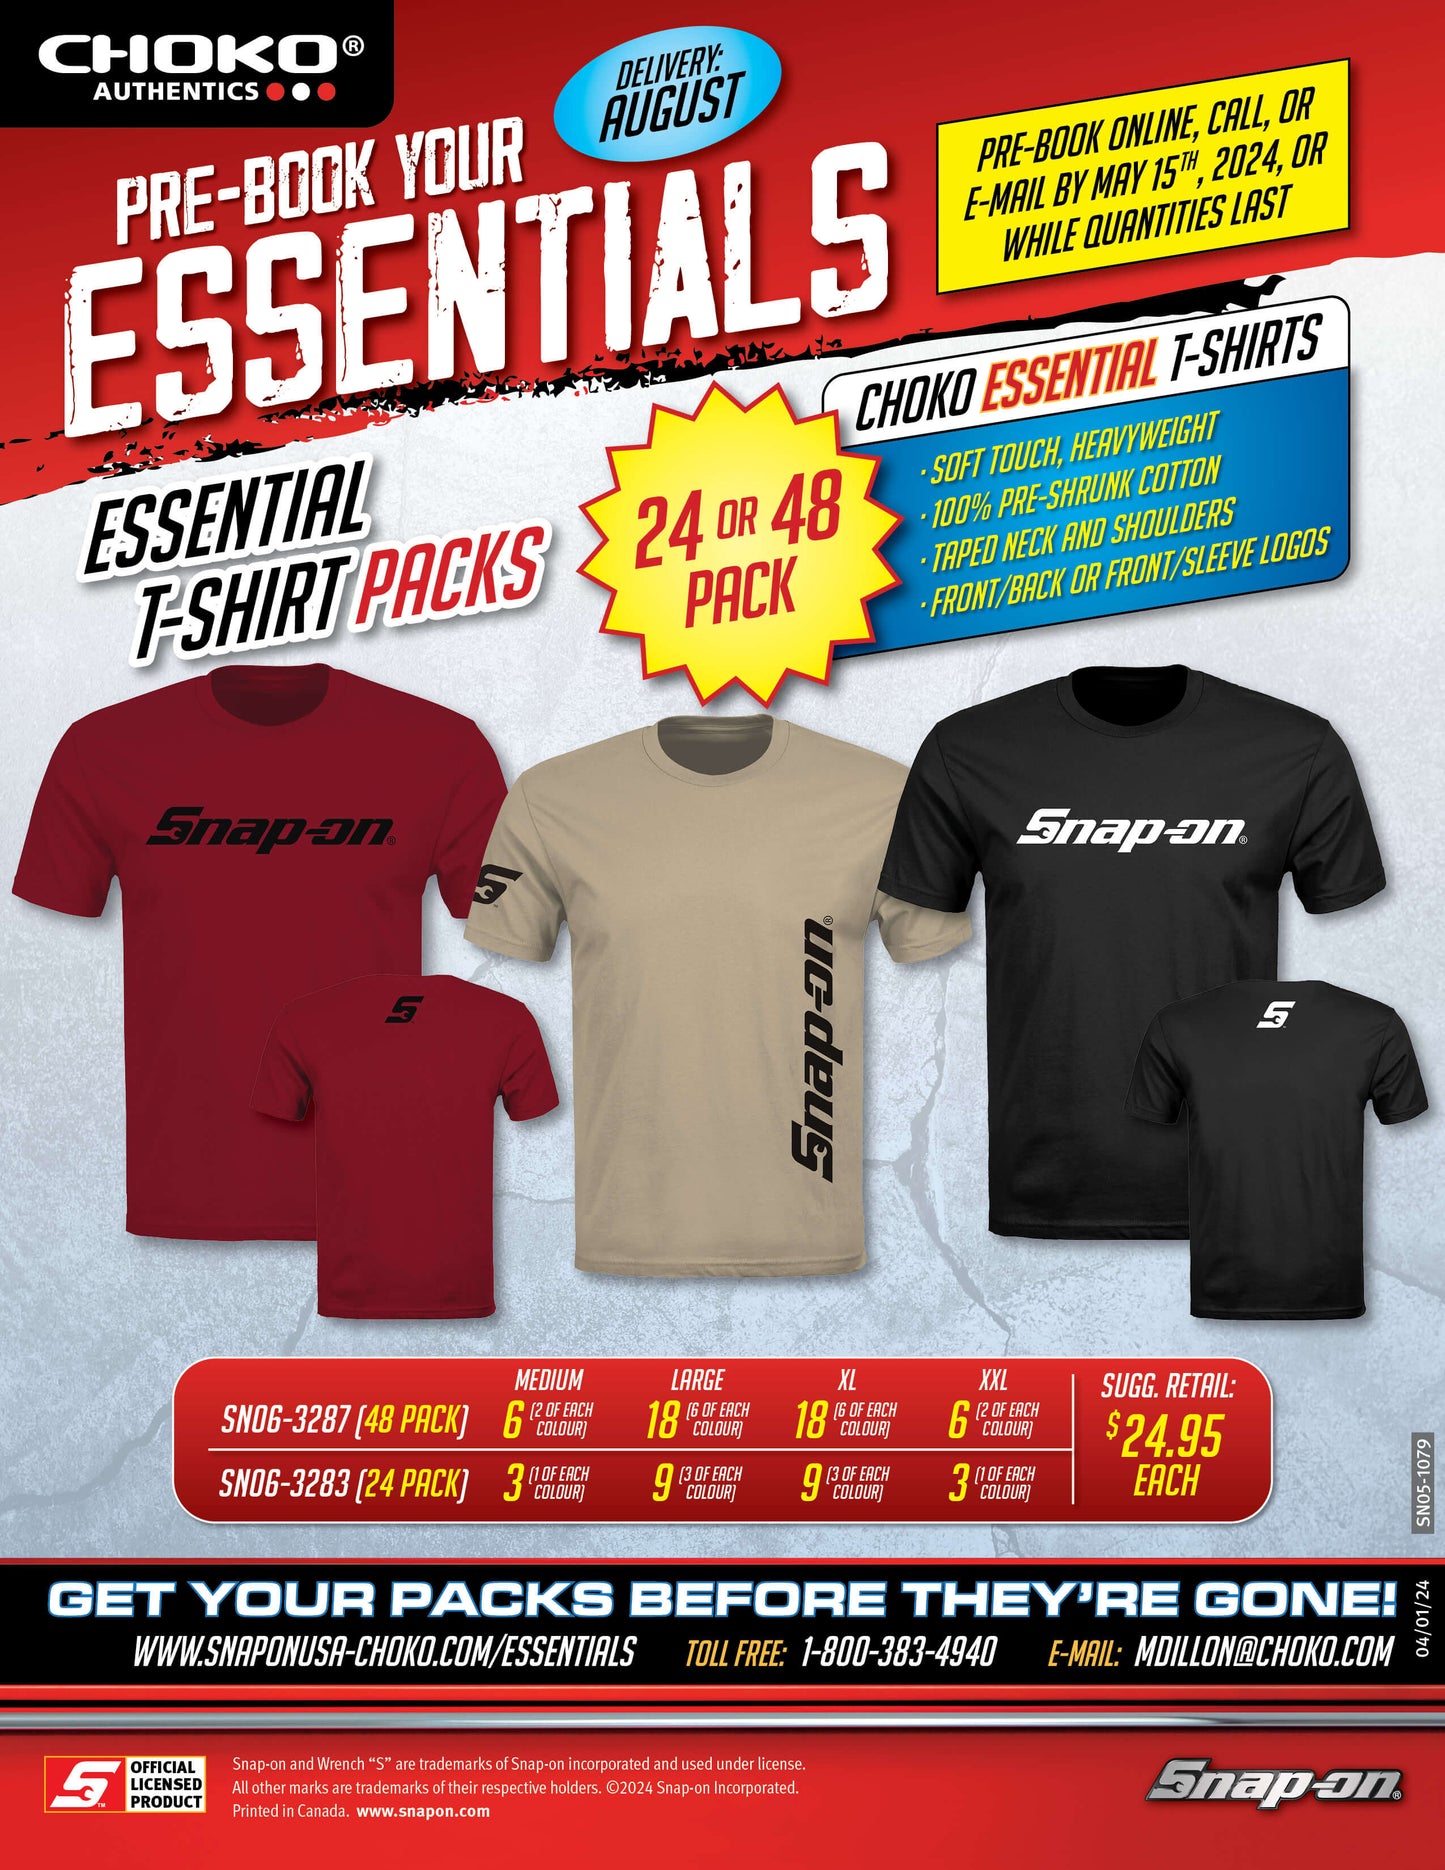 Essential T-Shirt Pack 2 - August Delivery